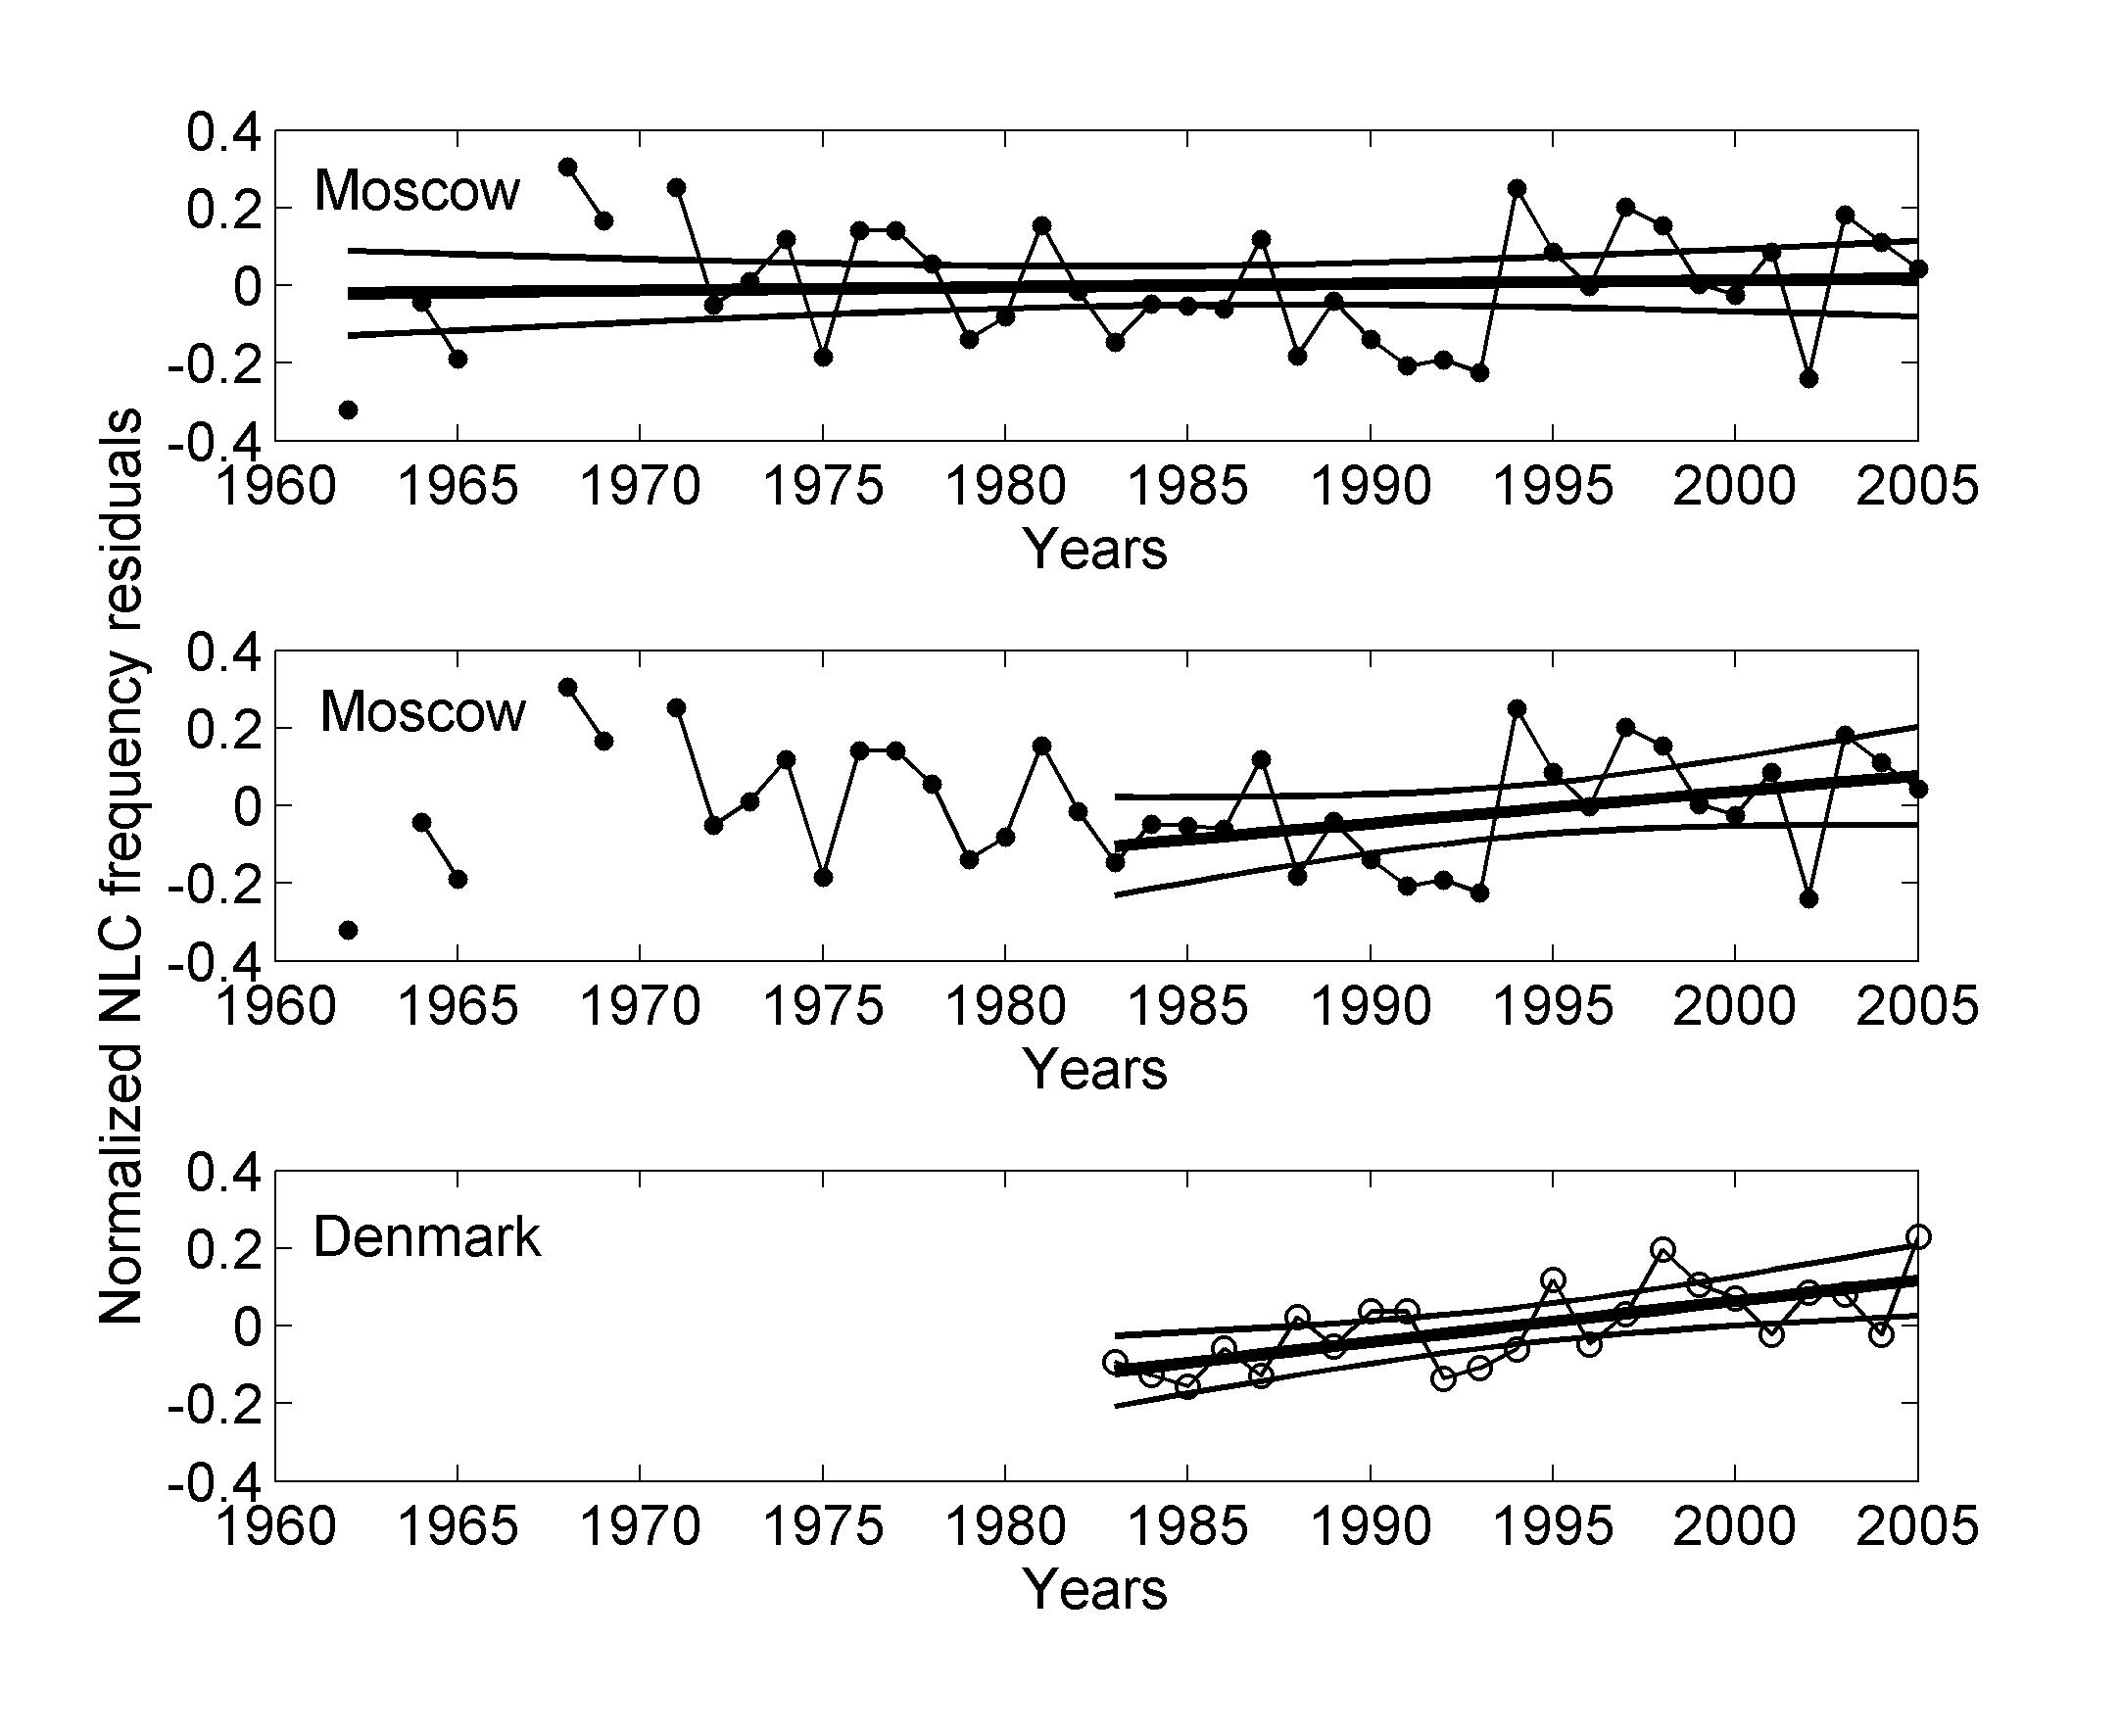 Fig. 1 Residuals (after the subtraction the variation correlated with the La flux) of the normalized NLC frequency. The thick line represents the secular trend and its 95% confidence interval. The upper panel demonstrates the Moscow linear fit for 1962–2005, the central panel is for the Moscow linear fit for 1983–2005 and the lower panel is for the Danish data for 1983–2005 (courtesy N. N. Pertsev).